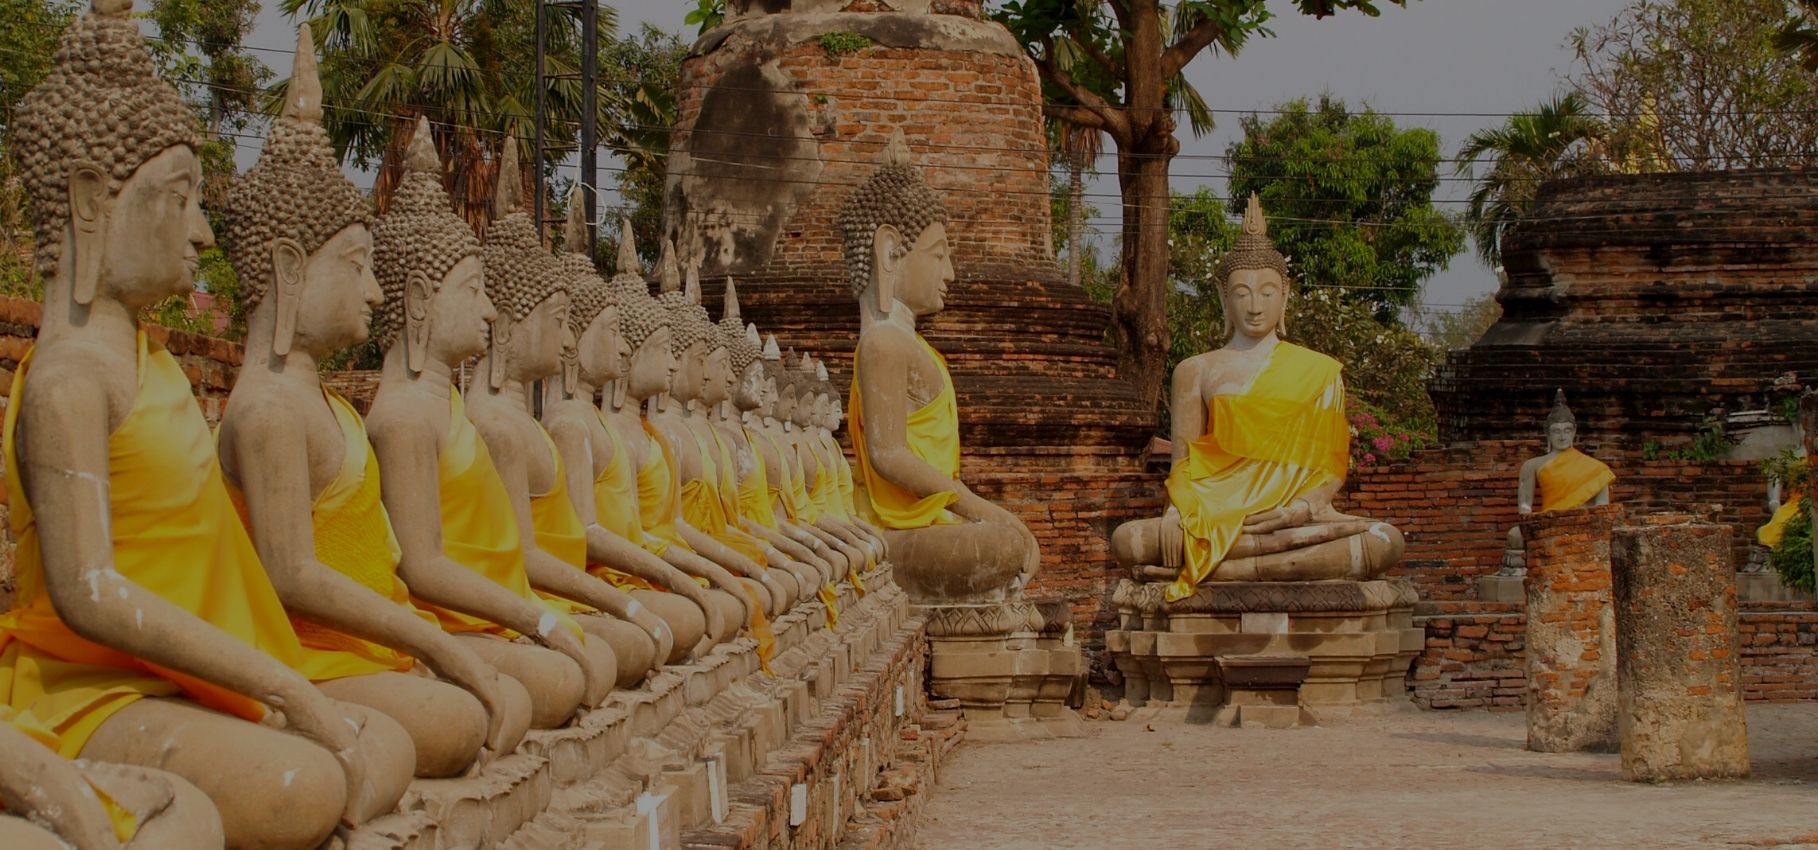 The Best things to do in Ayutthaya, Thailand